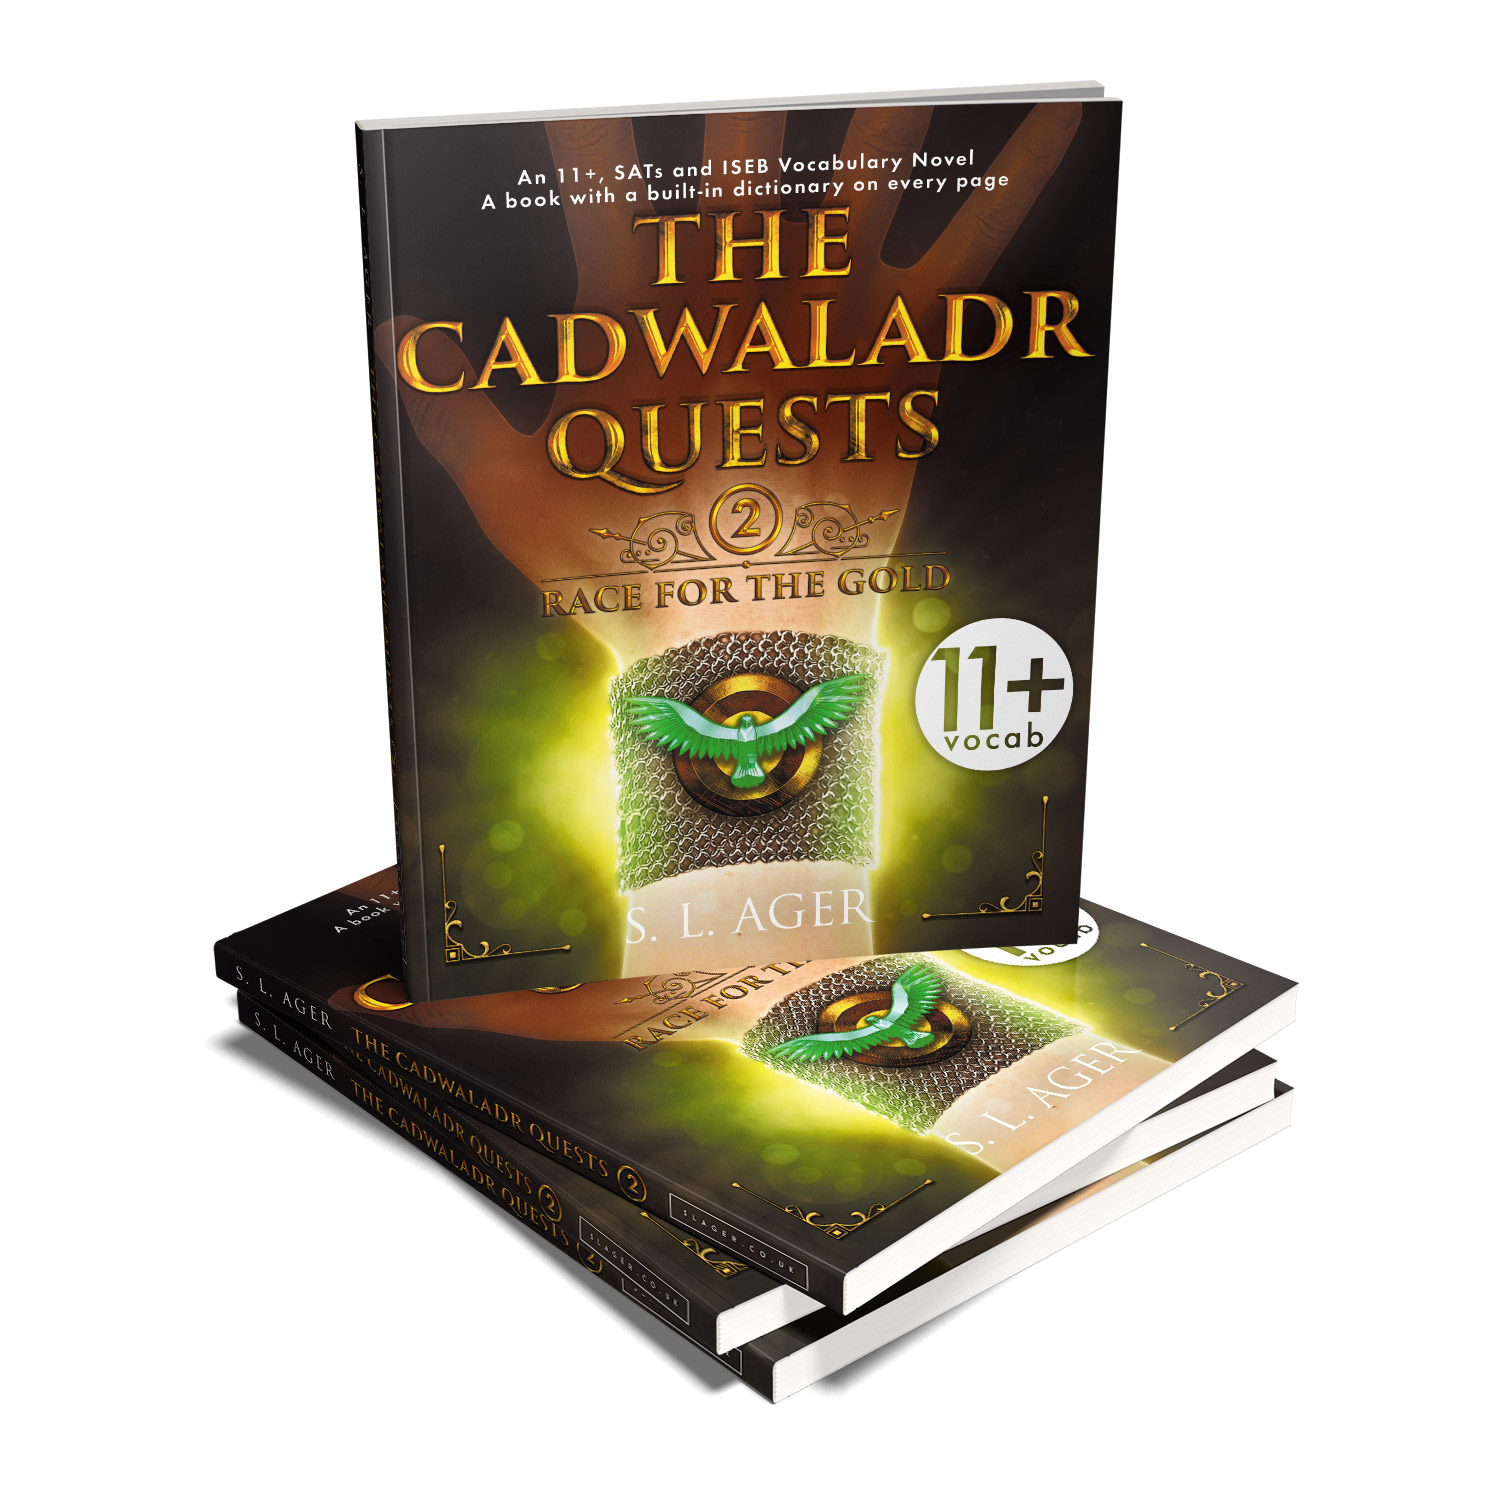 'The Cadwaladr Quests' is unique, story-based, educational tool that teaches young readers nearly 3000 exam-level English words. The author is S L Ager. The book cover and interior design are by Mark Thomas. To learn more about what Mark could do for your book, please visit coverness.com.